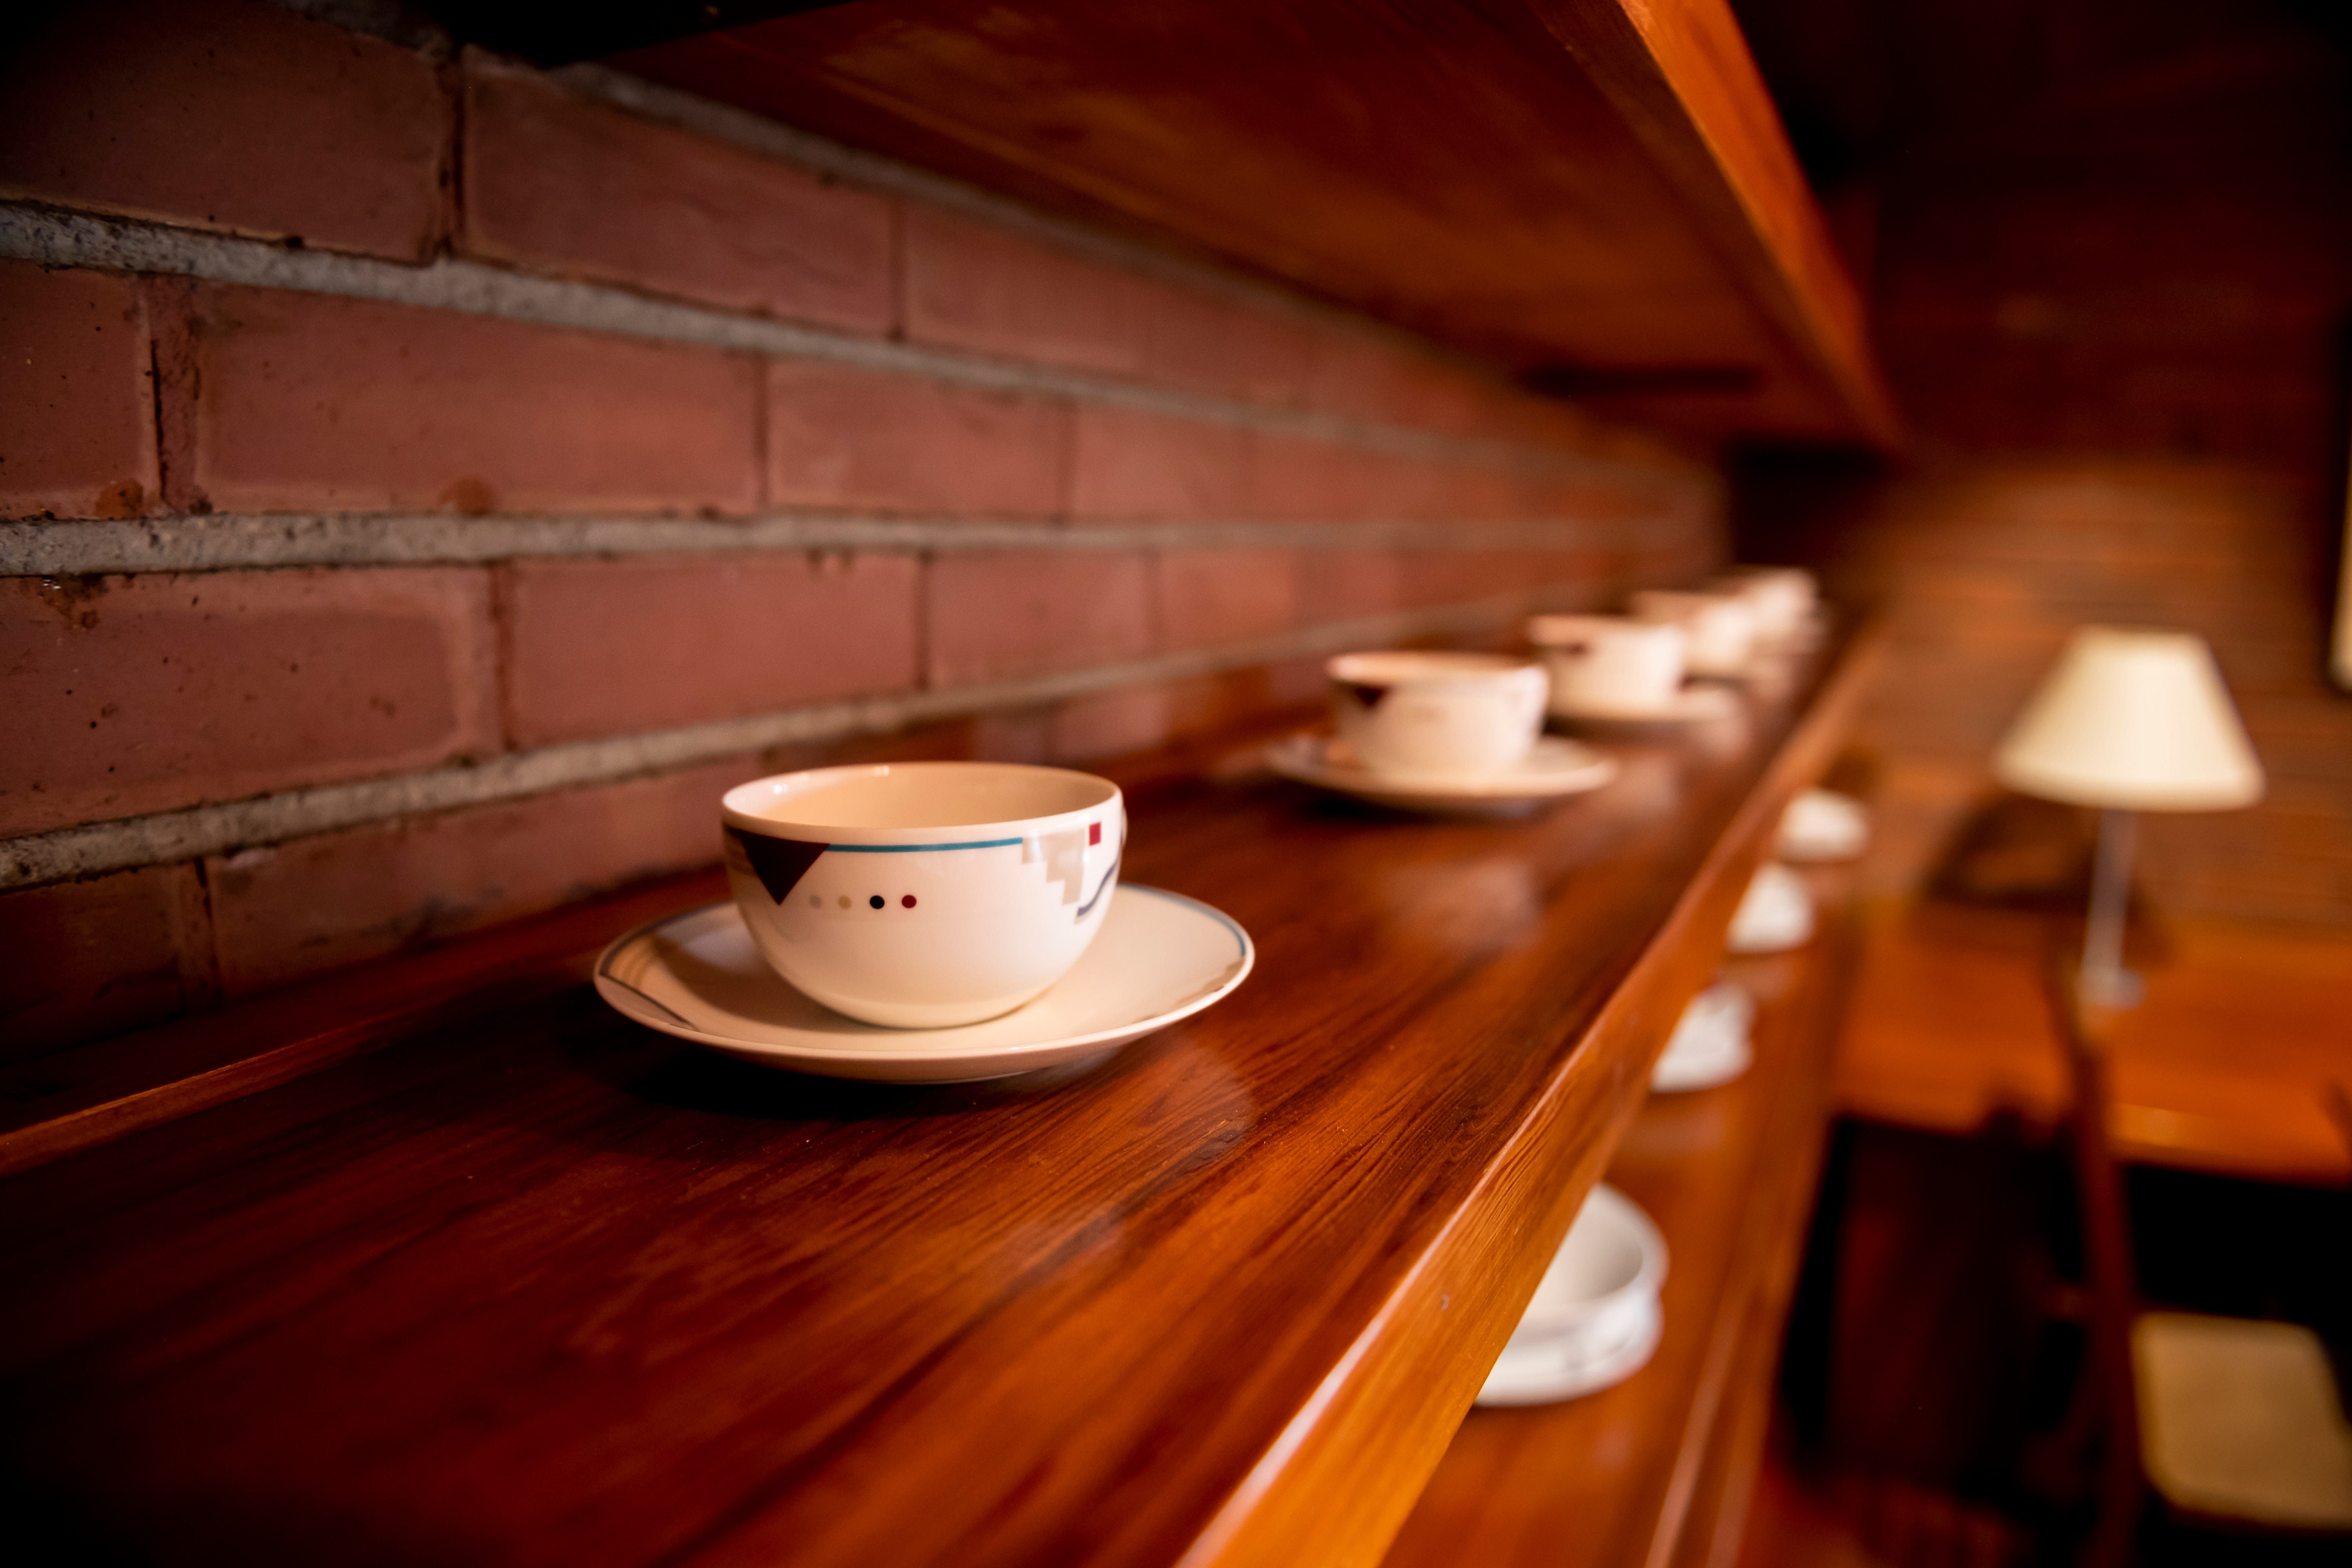 The dining area includes shelves built by Wright to display dinnerware.